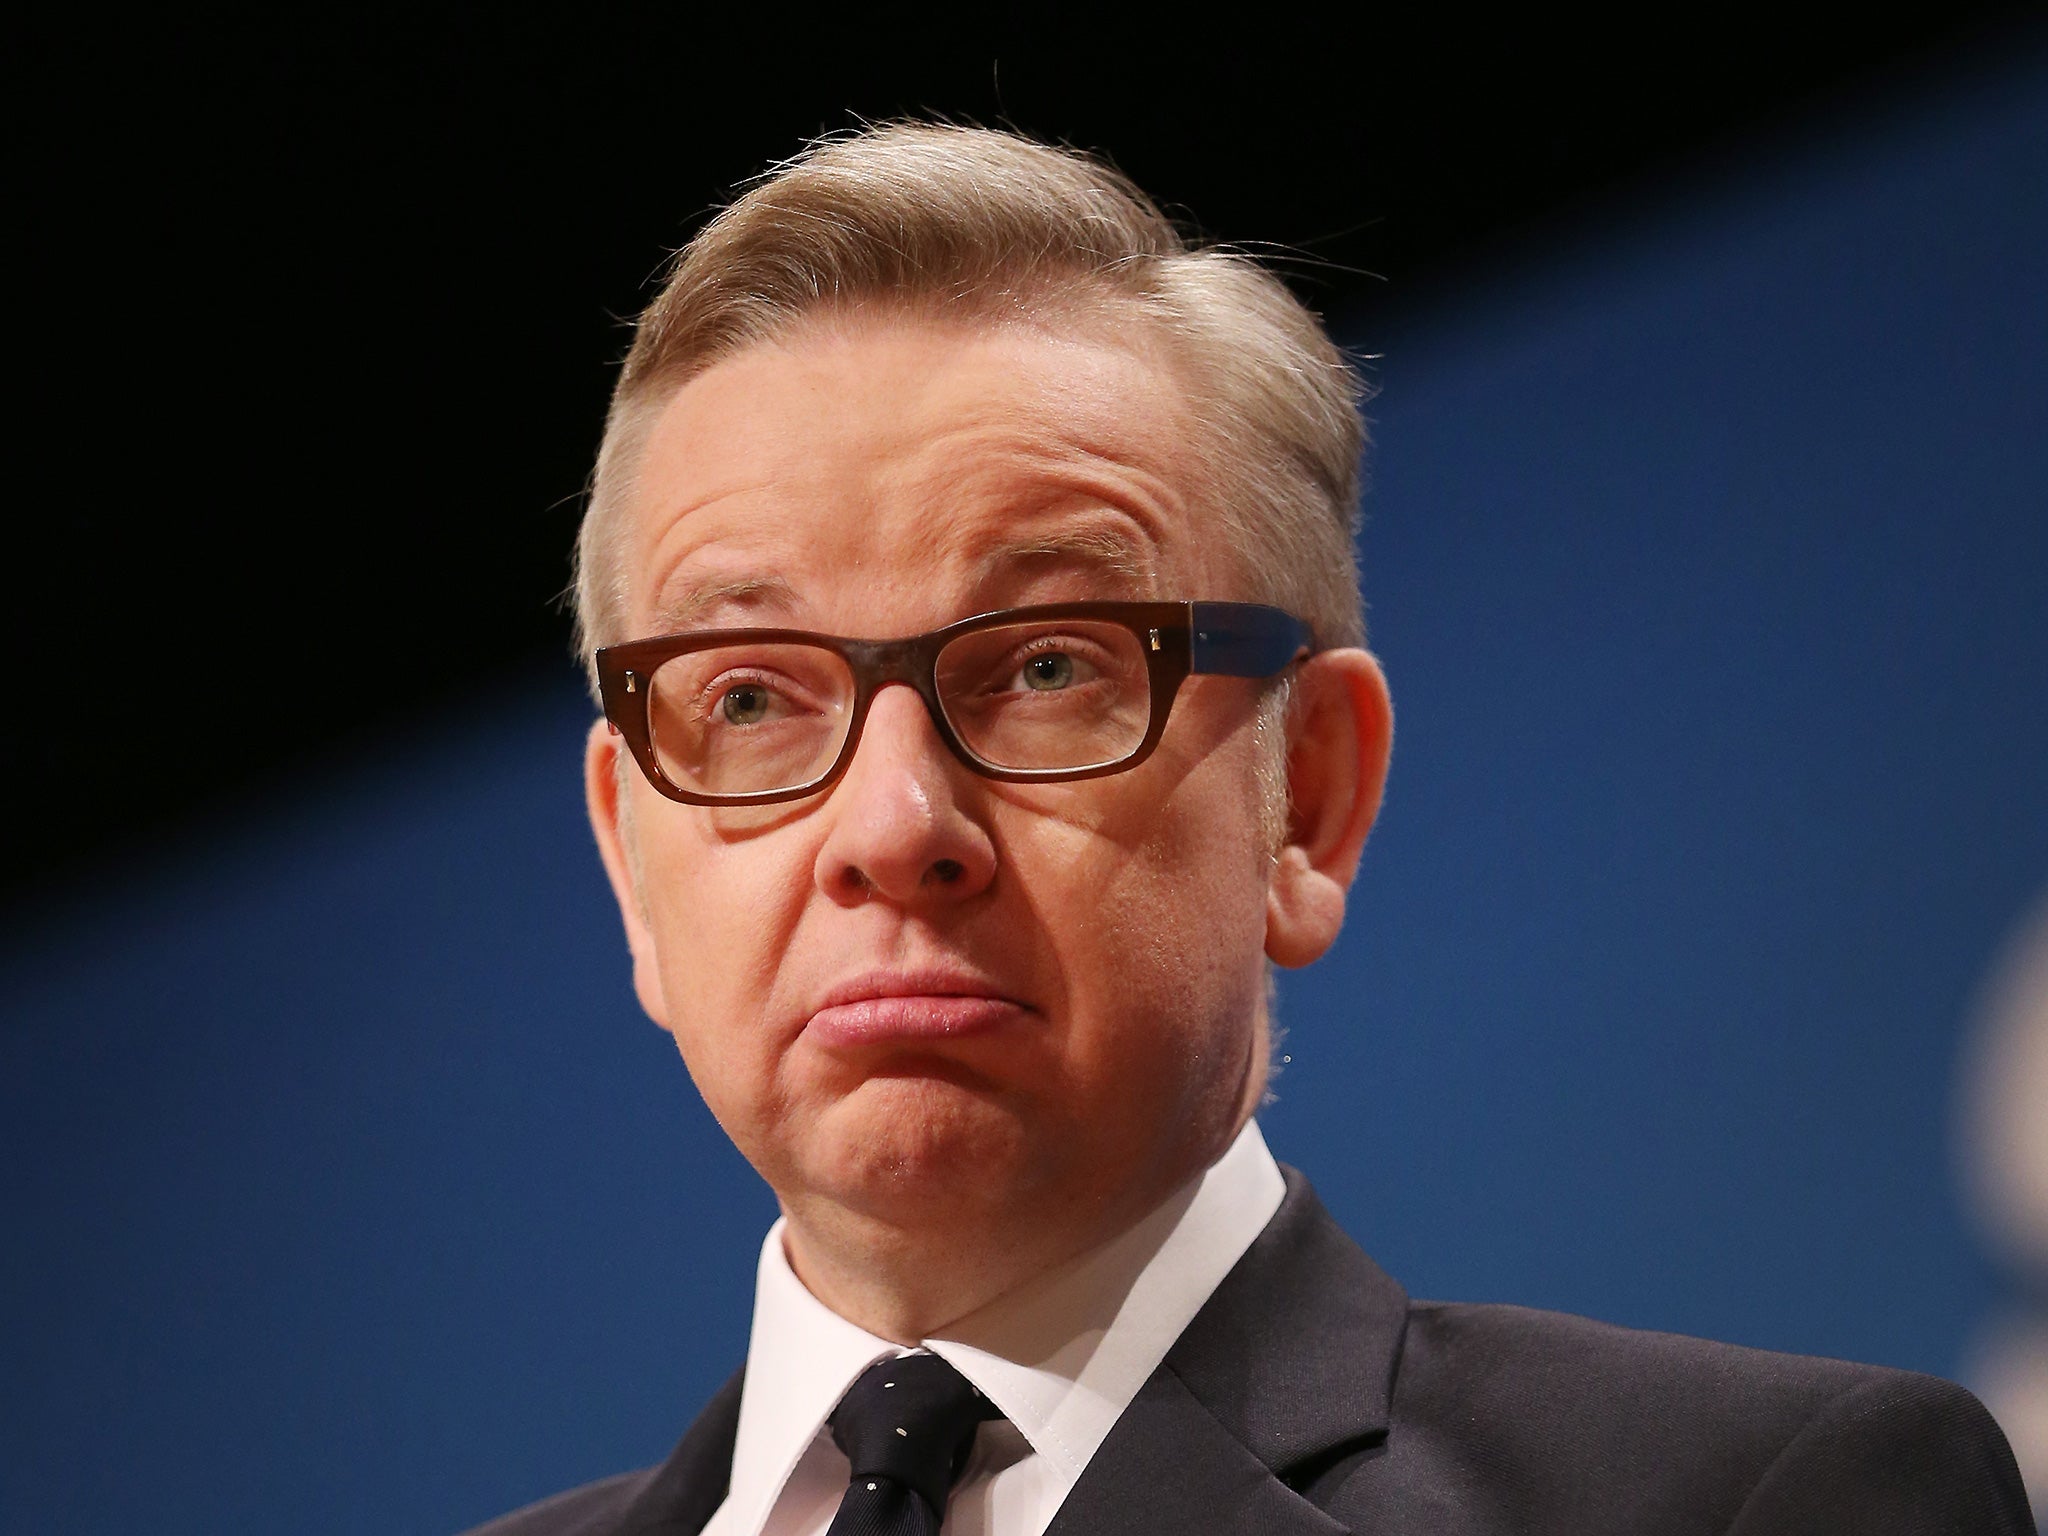 Secretary of State for justice Michael Gove